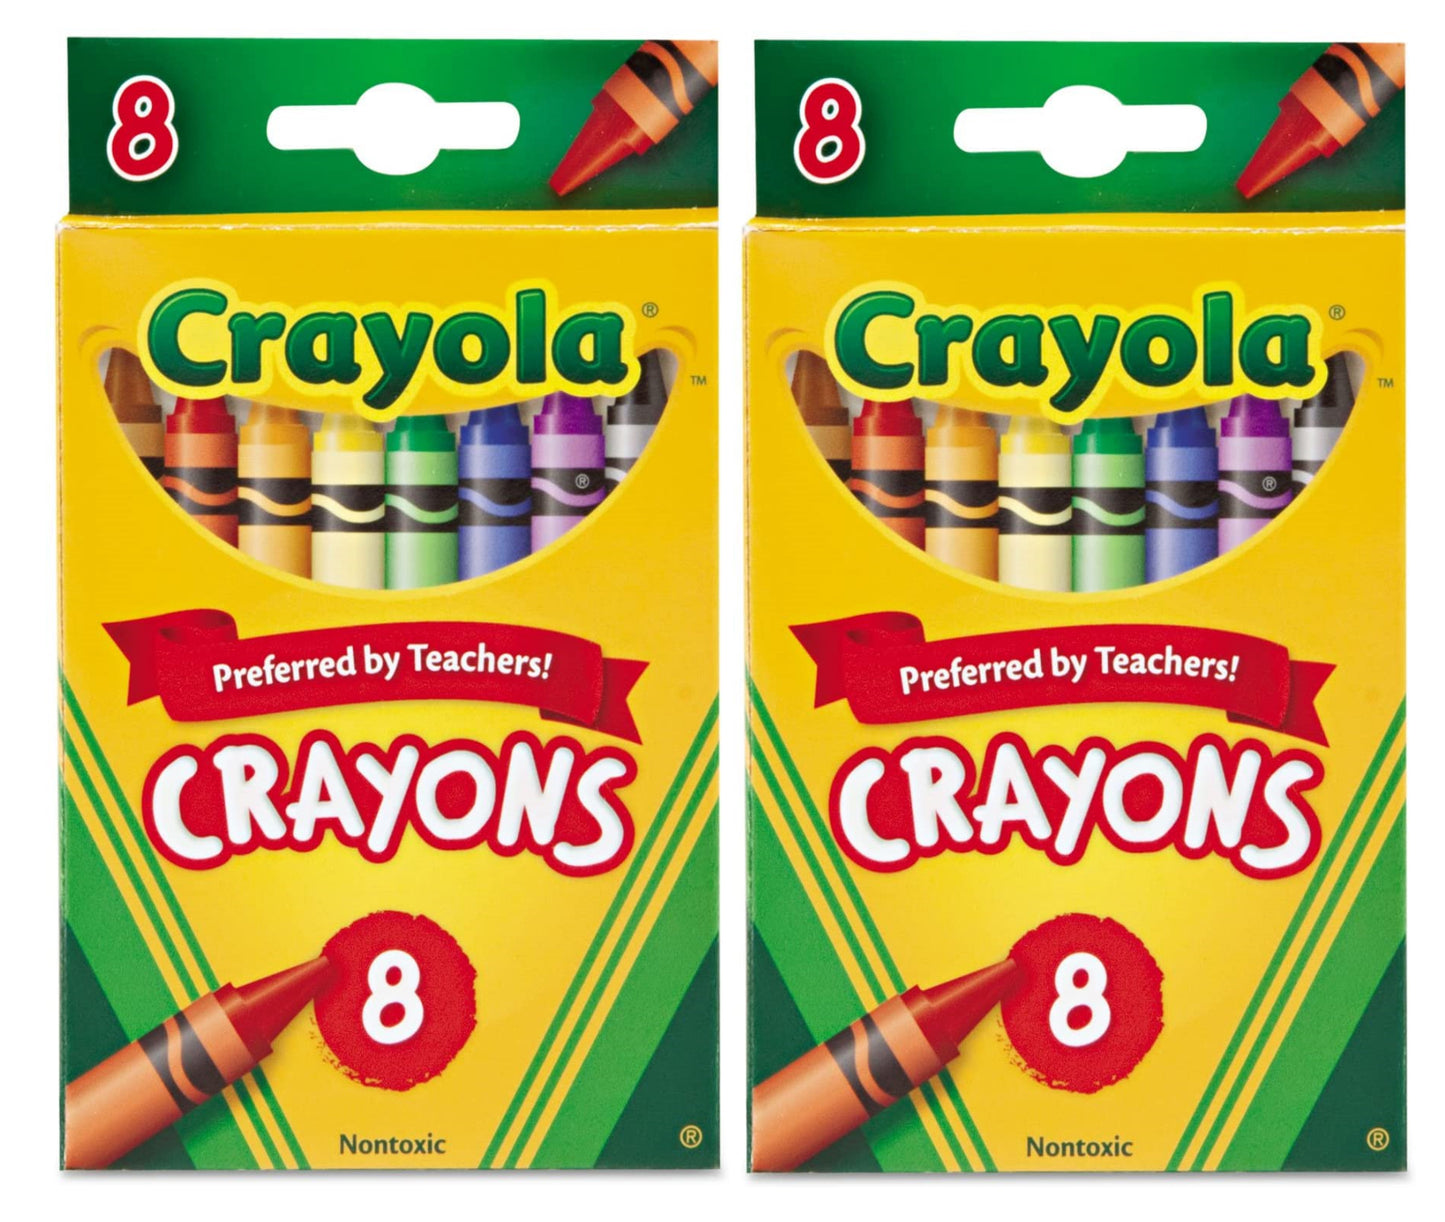 Crayola Classic Color Crayons, 8 Assorted Colors Non-washable for children of all ages - Pack of 2